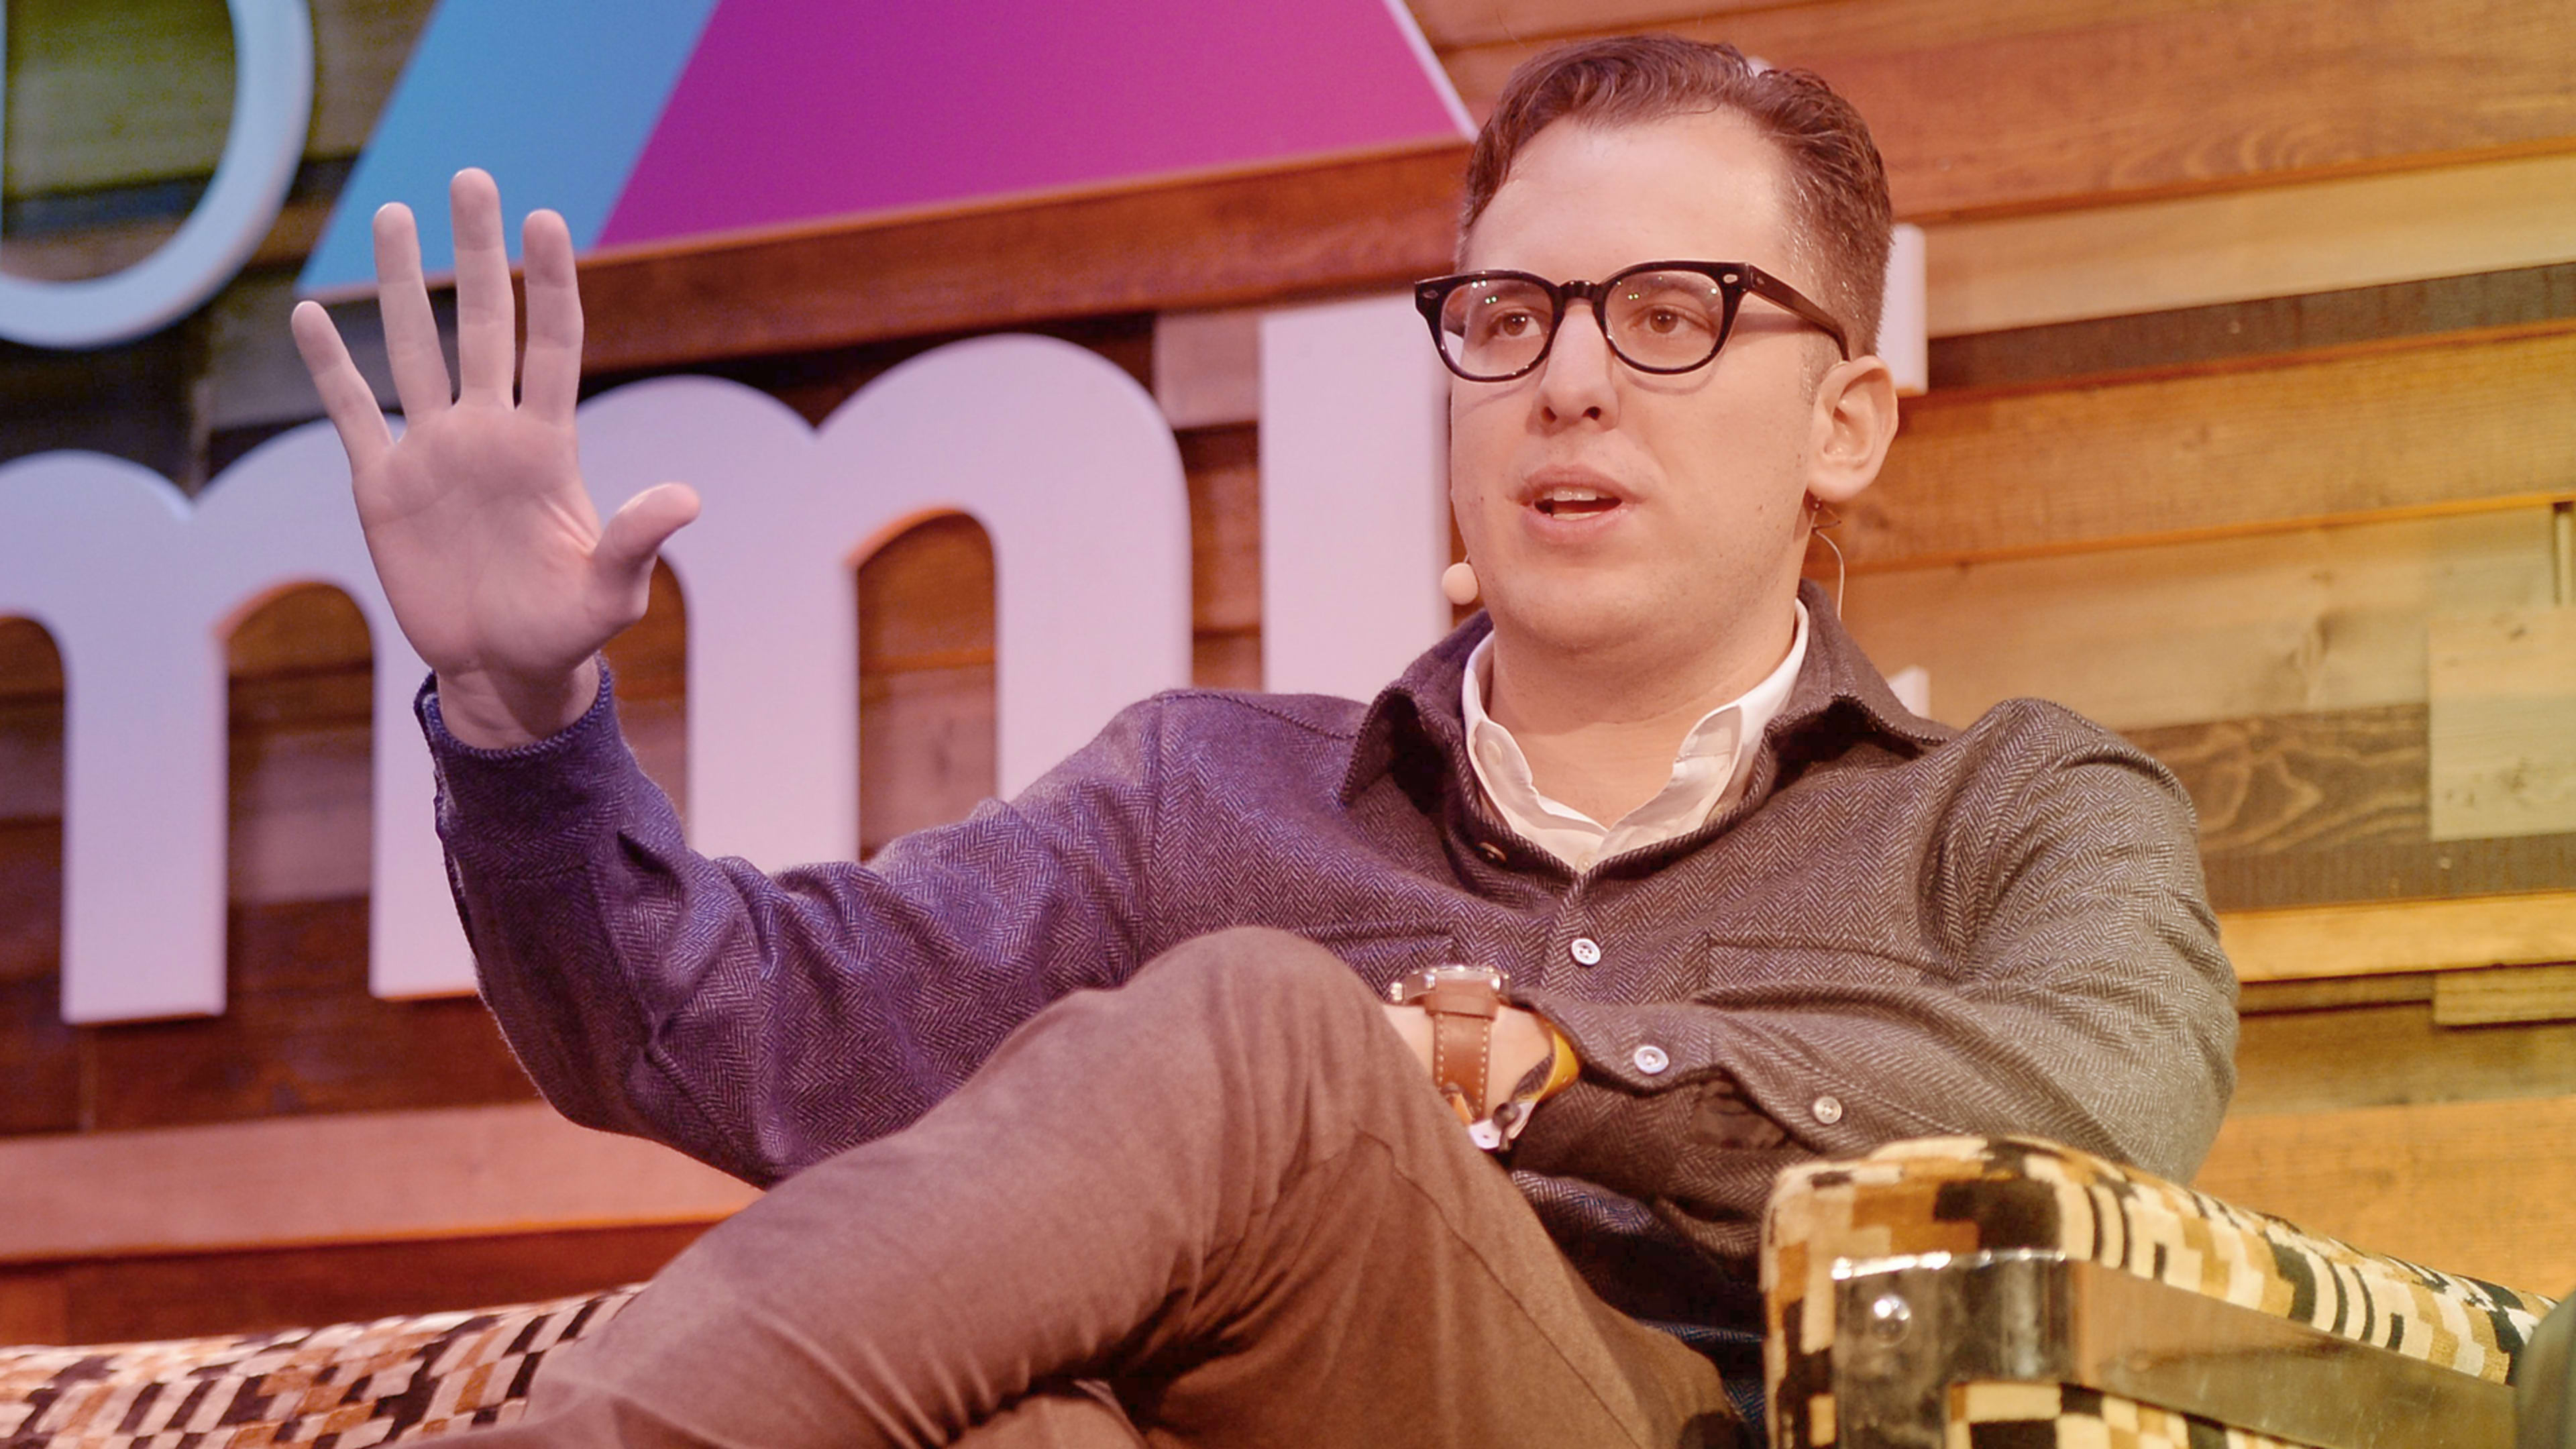 Exclusive: Instagram cofounder Mike Krieger talks growth and leadership just before resigning